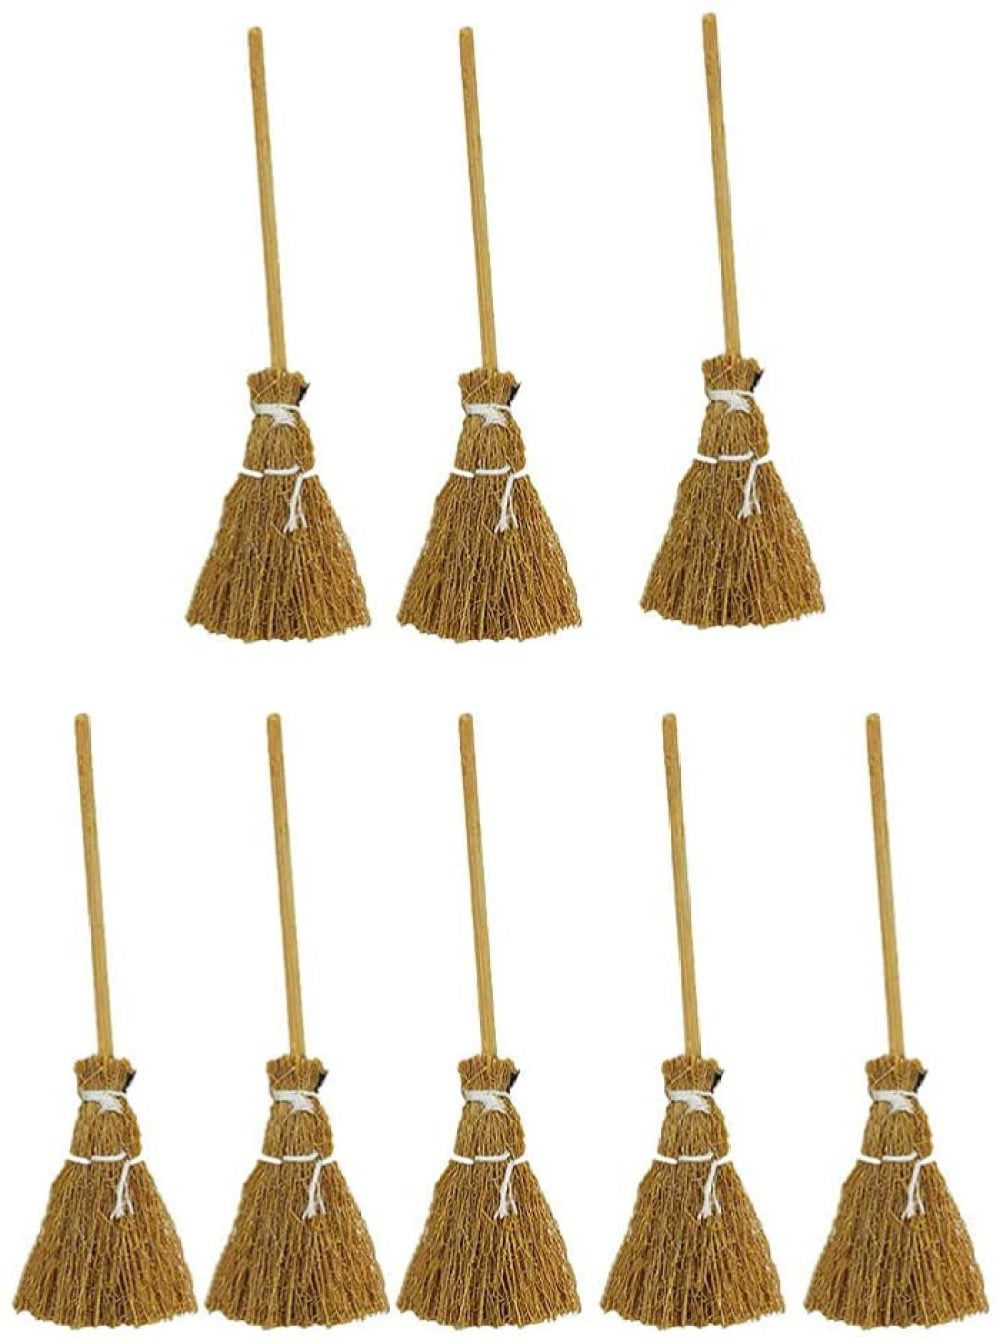 Yardwe 8pcs Miniature Artificial Mini Brooms Straw Craft Decoration Witches Accessory for Halloween Party 